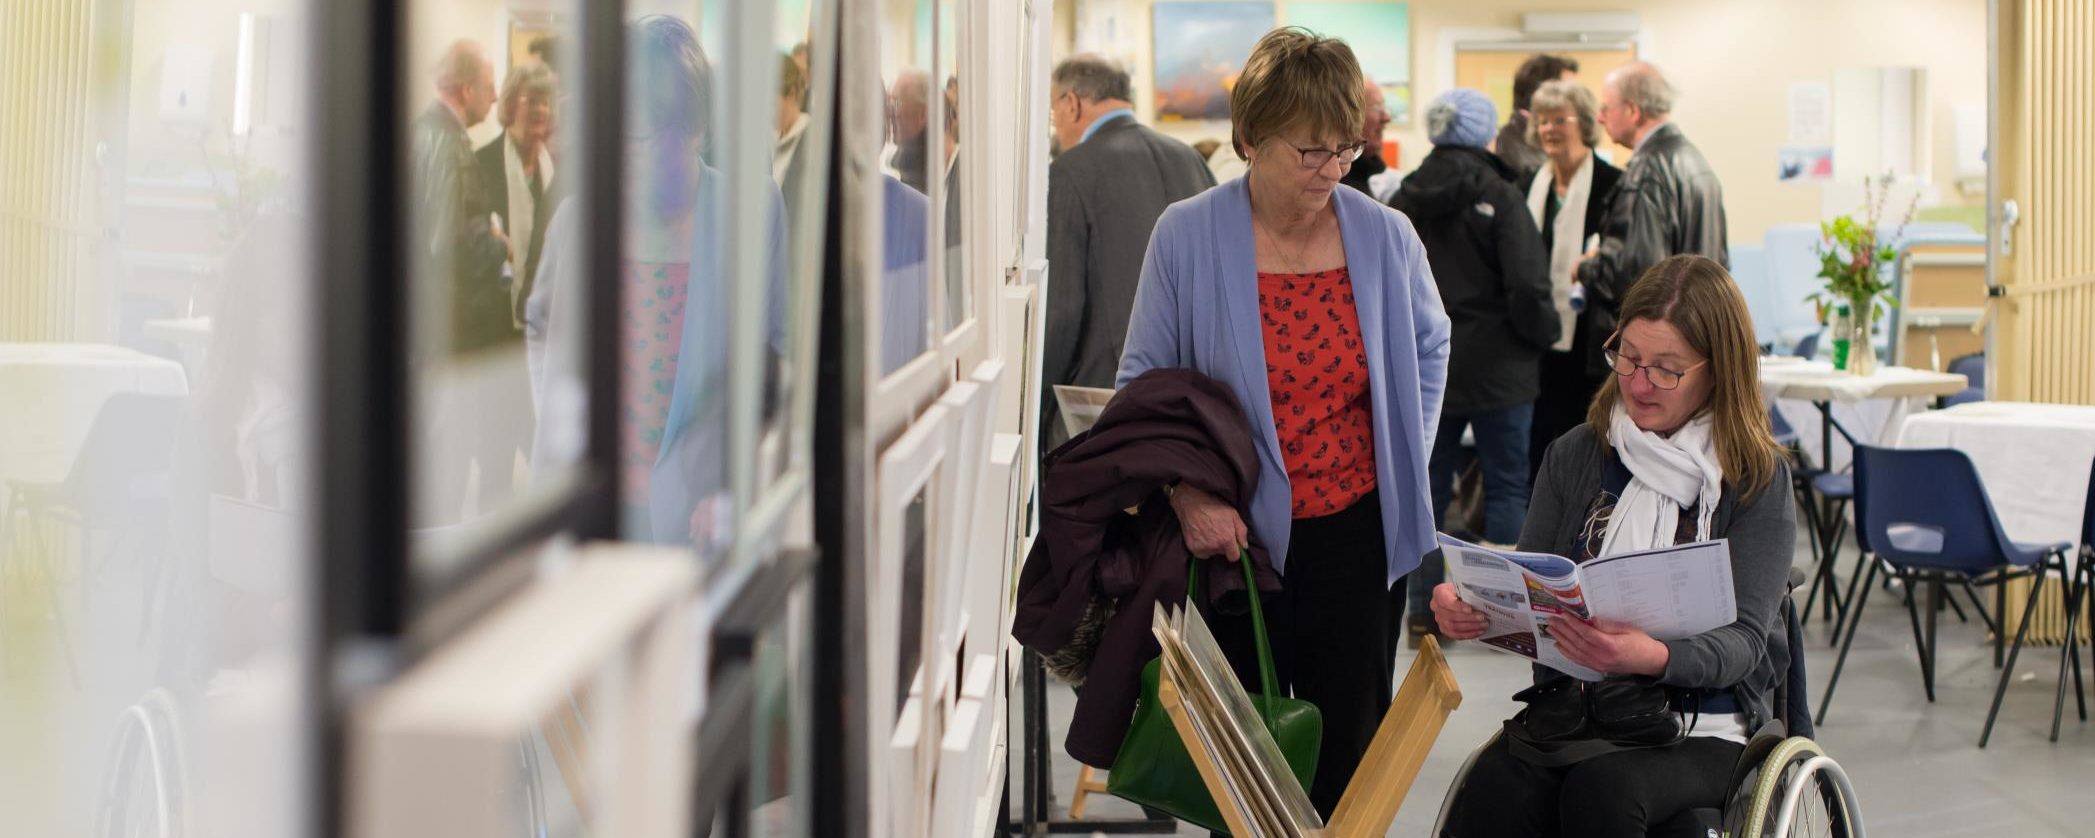 One of our members looking through the art catalogue